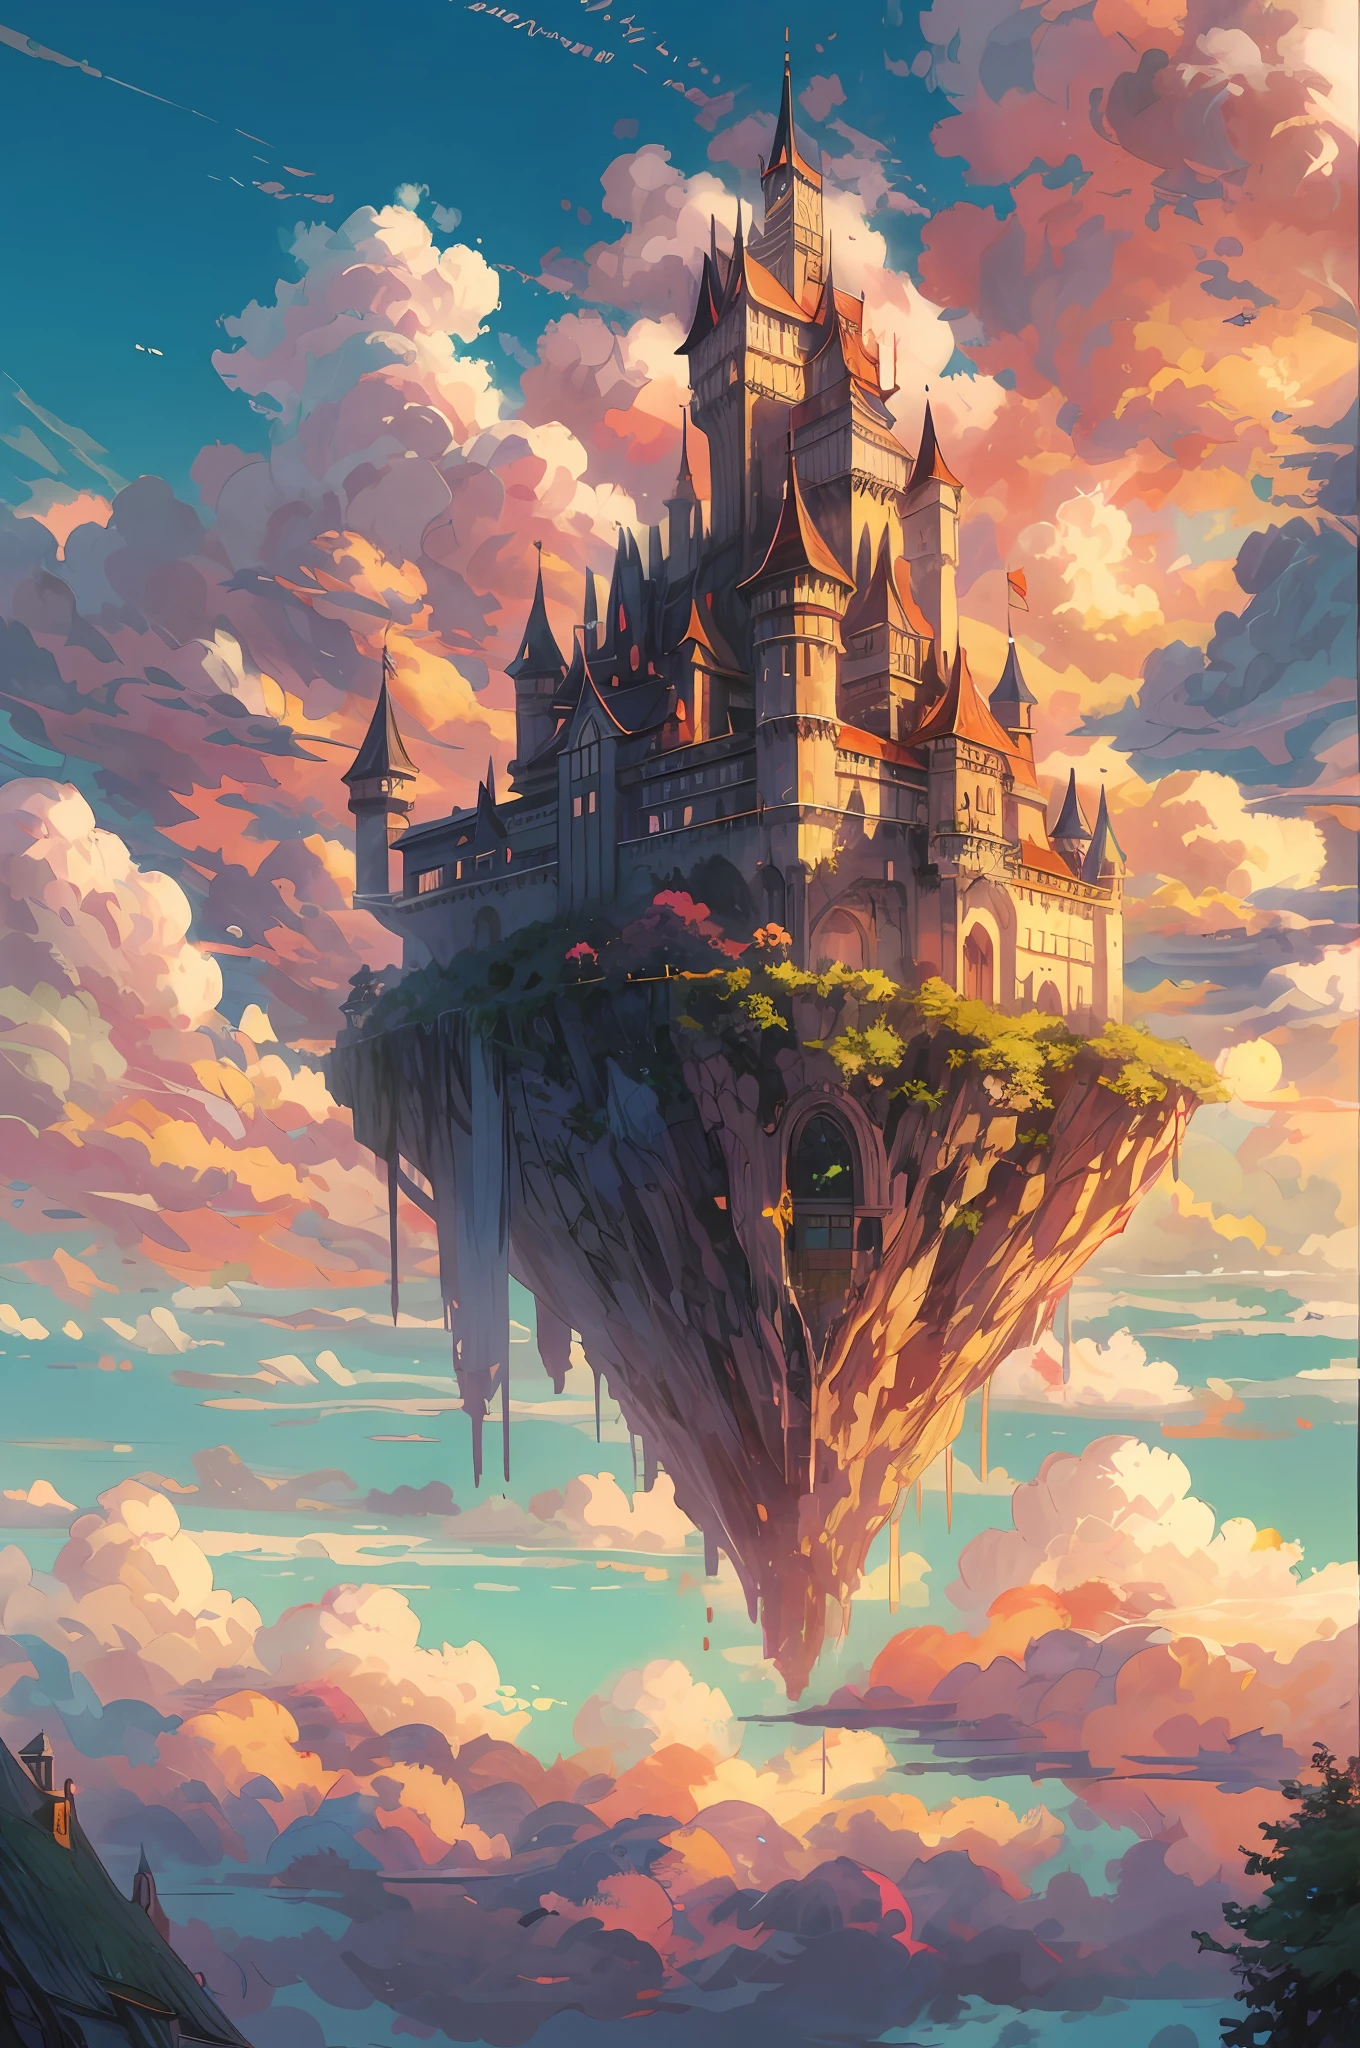 anime - style castle with a pathway leading to it and a garden, fairy tale  style background, palace background, beautiful render of a fairytale,  fantasy castle - SeaArt AI